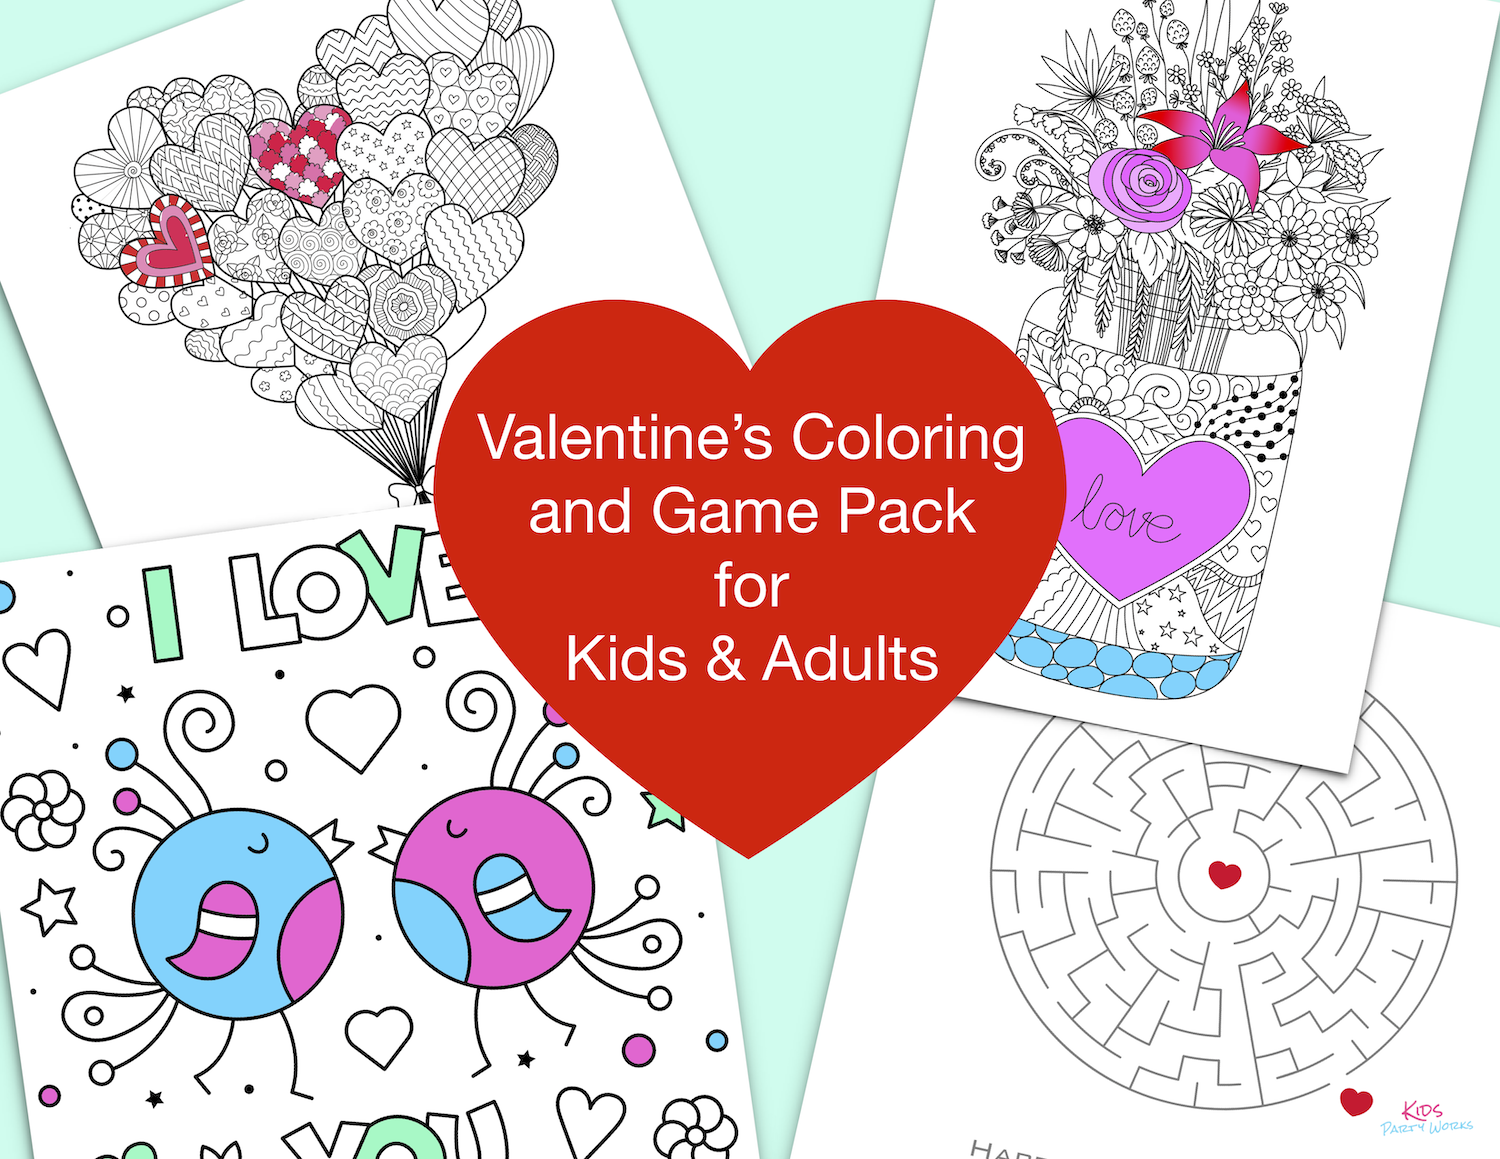 Free Valentine's Day Coloring Pages by KidsPartyWorks.Com